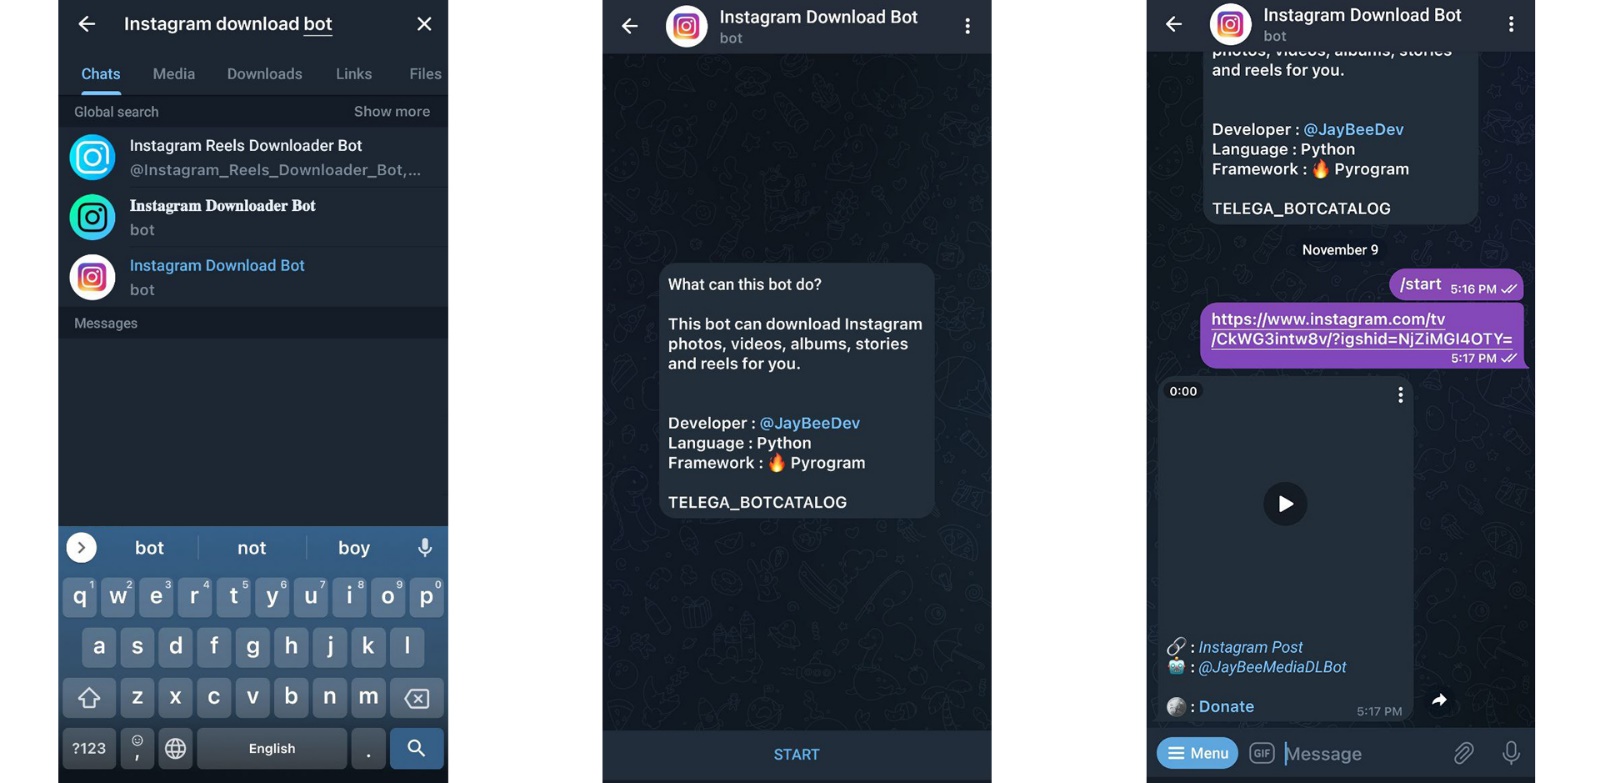 Step-by-step tutorial for downloading Instagram video by Telegram bot